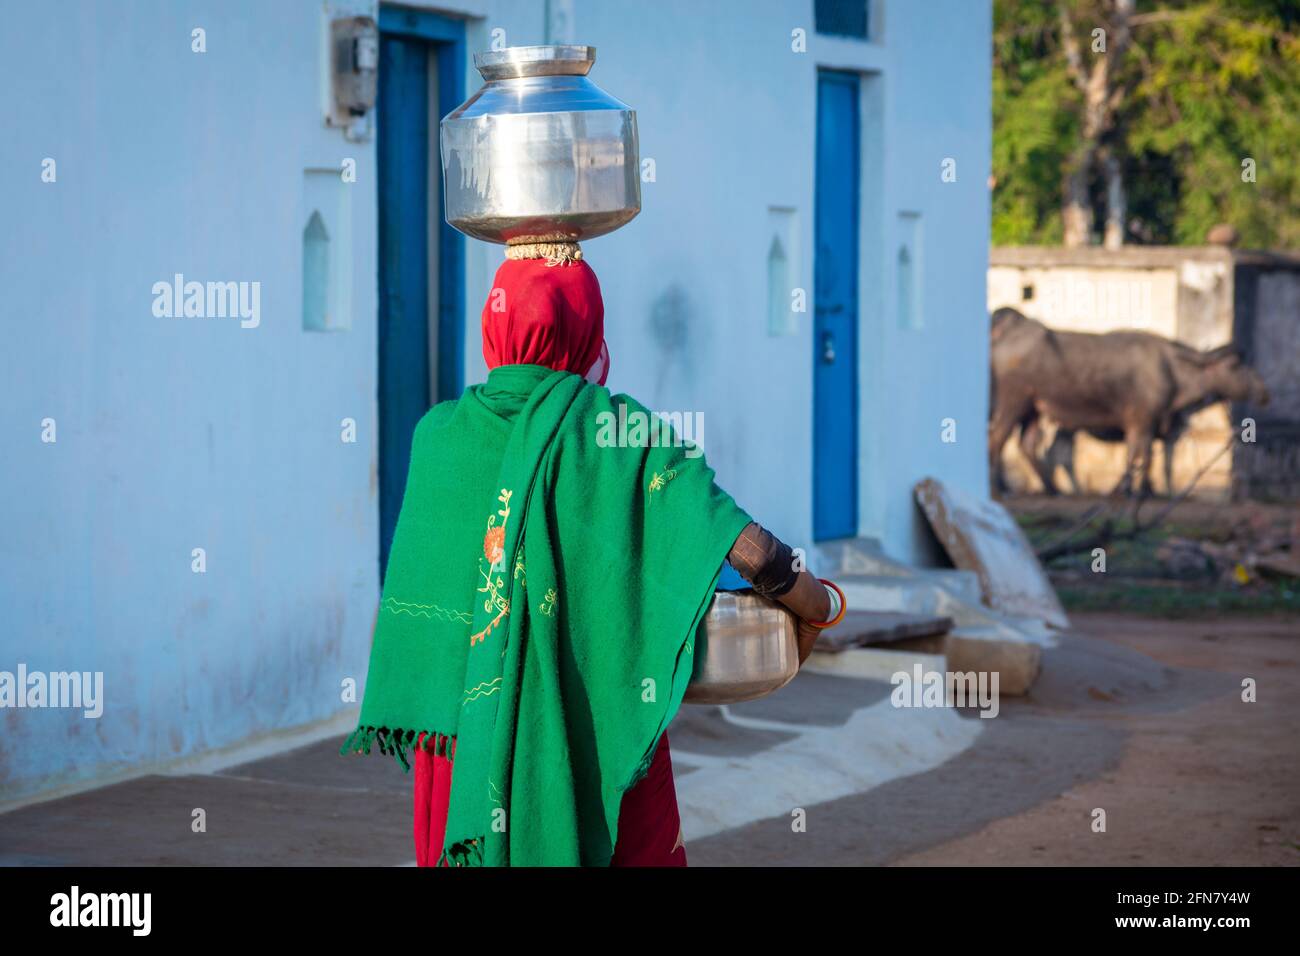 An Indian woman carrying a container of water on her head, An Indian rural scene. Stock Photo